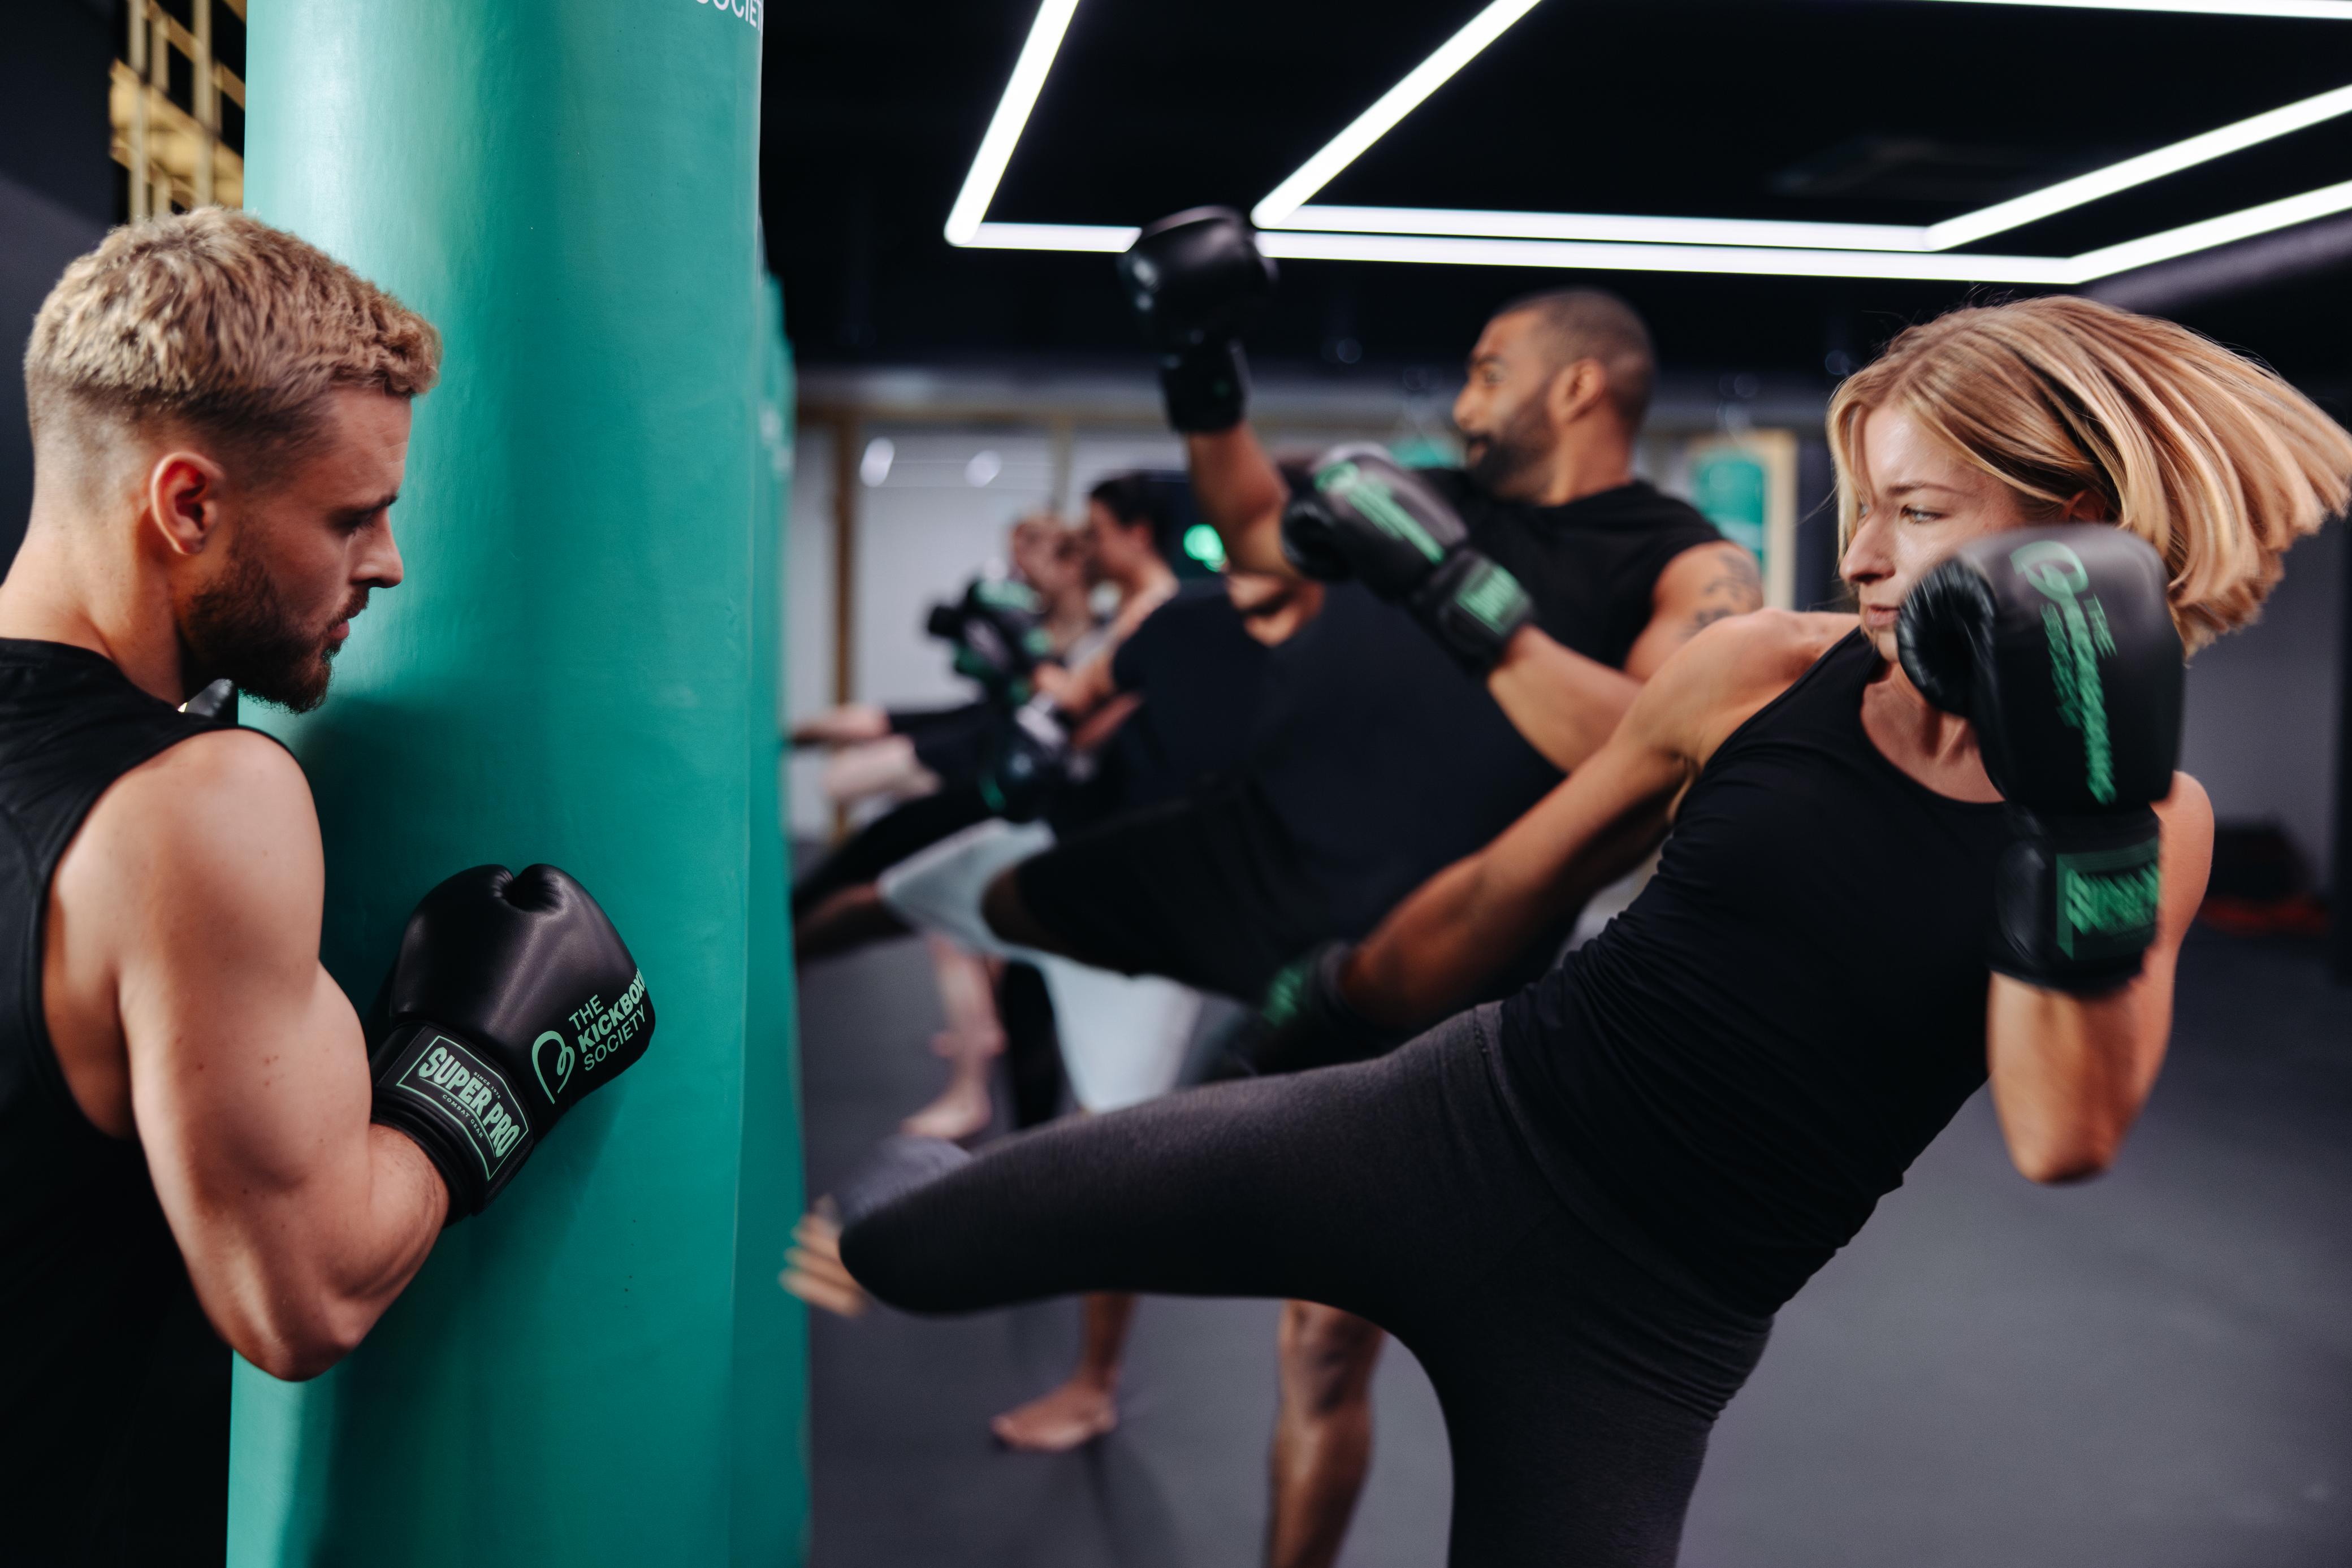 Photo credit: Burak Goraler. Discover the new Kickboxing Society club in Rotterdam, founded by Rico Verhoeven. Join for top-notch kickboxing and fitness training.